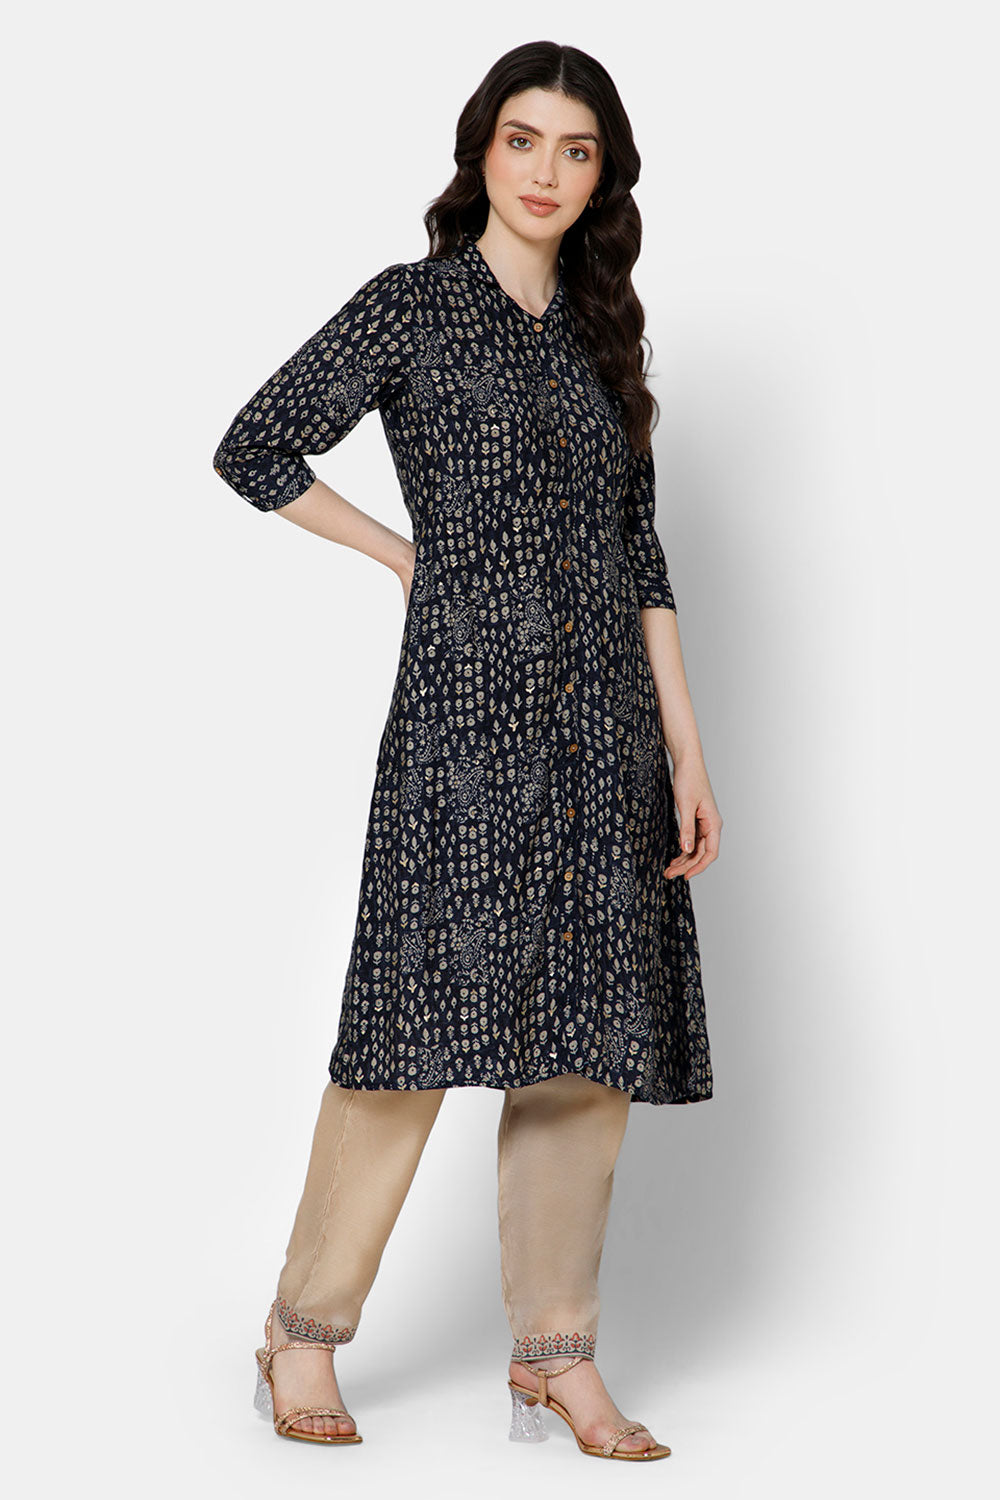 Mythri Women's Fit and Flare Casual Dress - Navy Blue - DR06